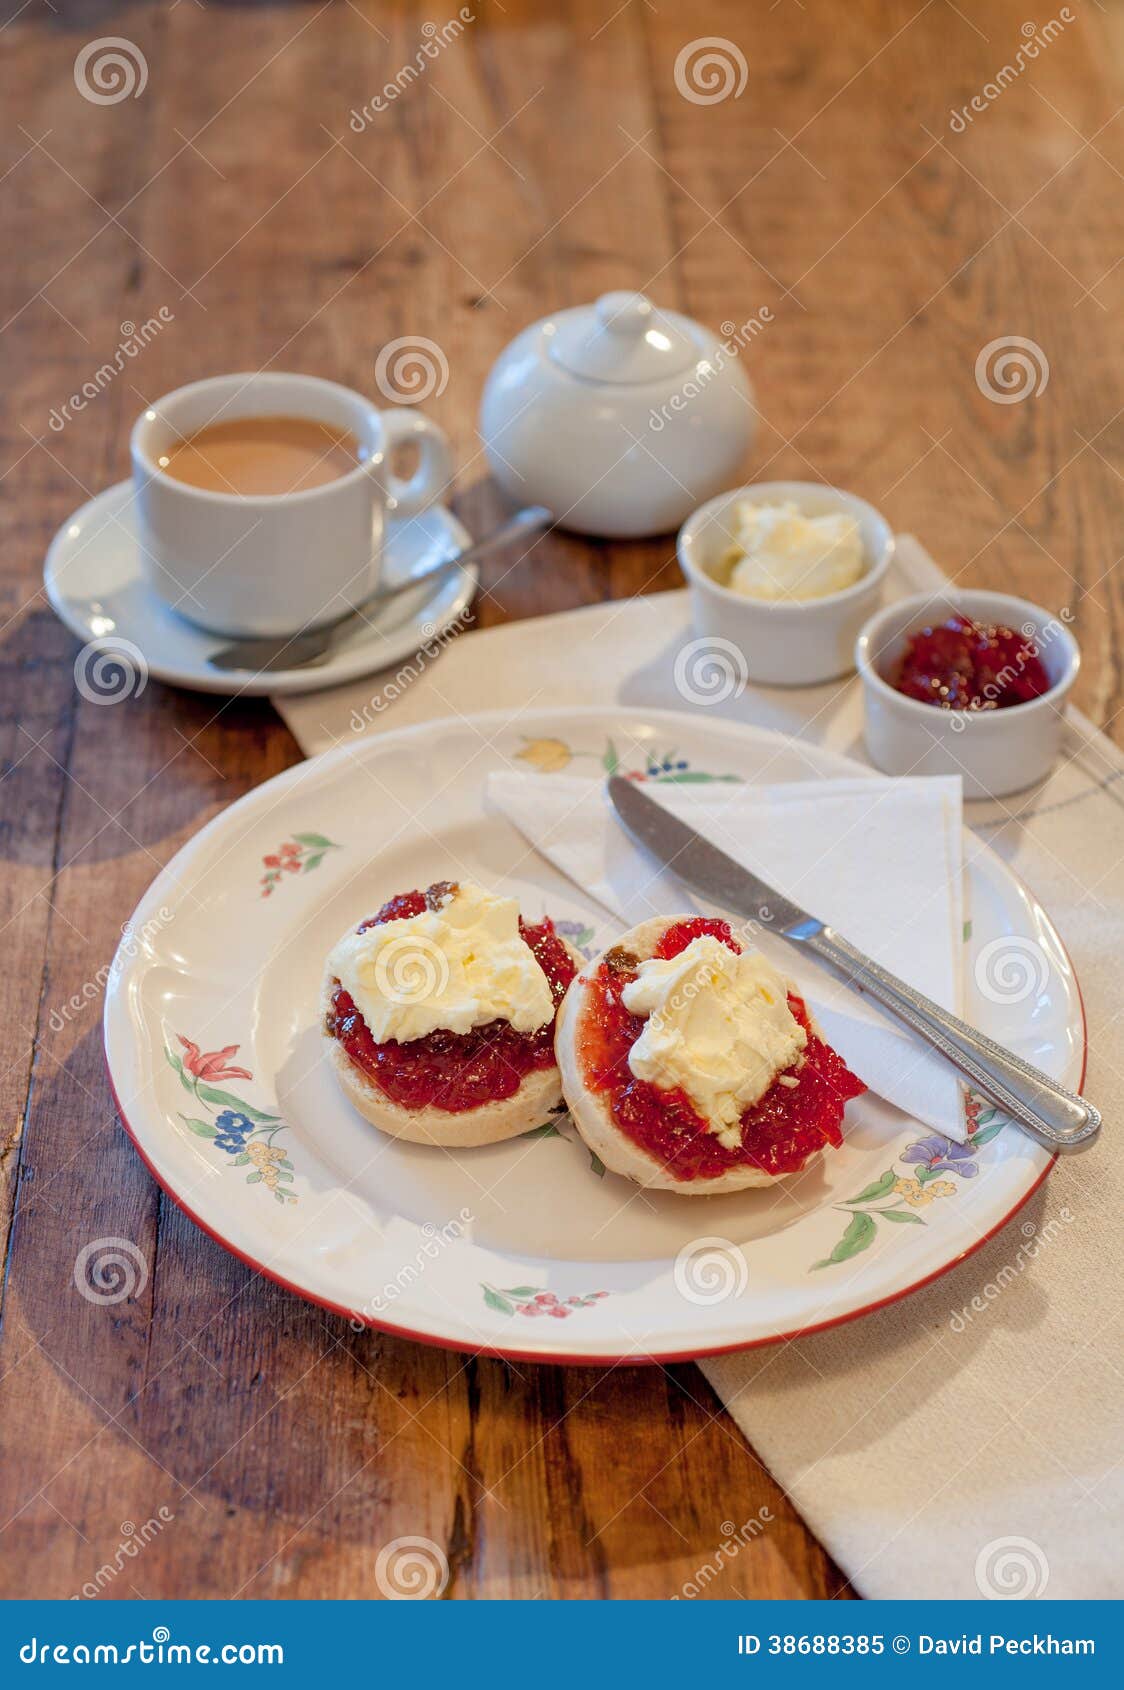 afternoon tea with scones, jam and clotted cream